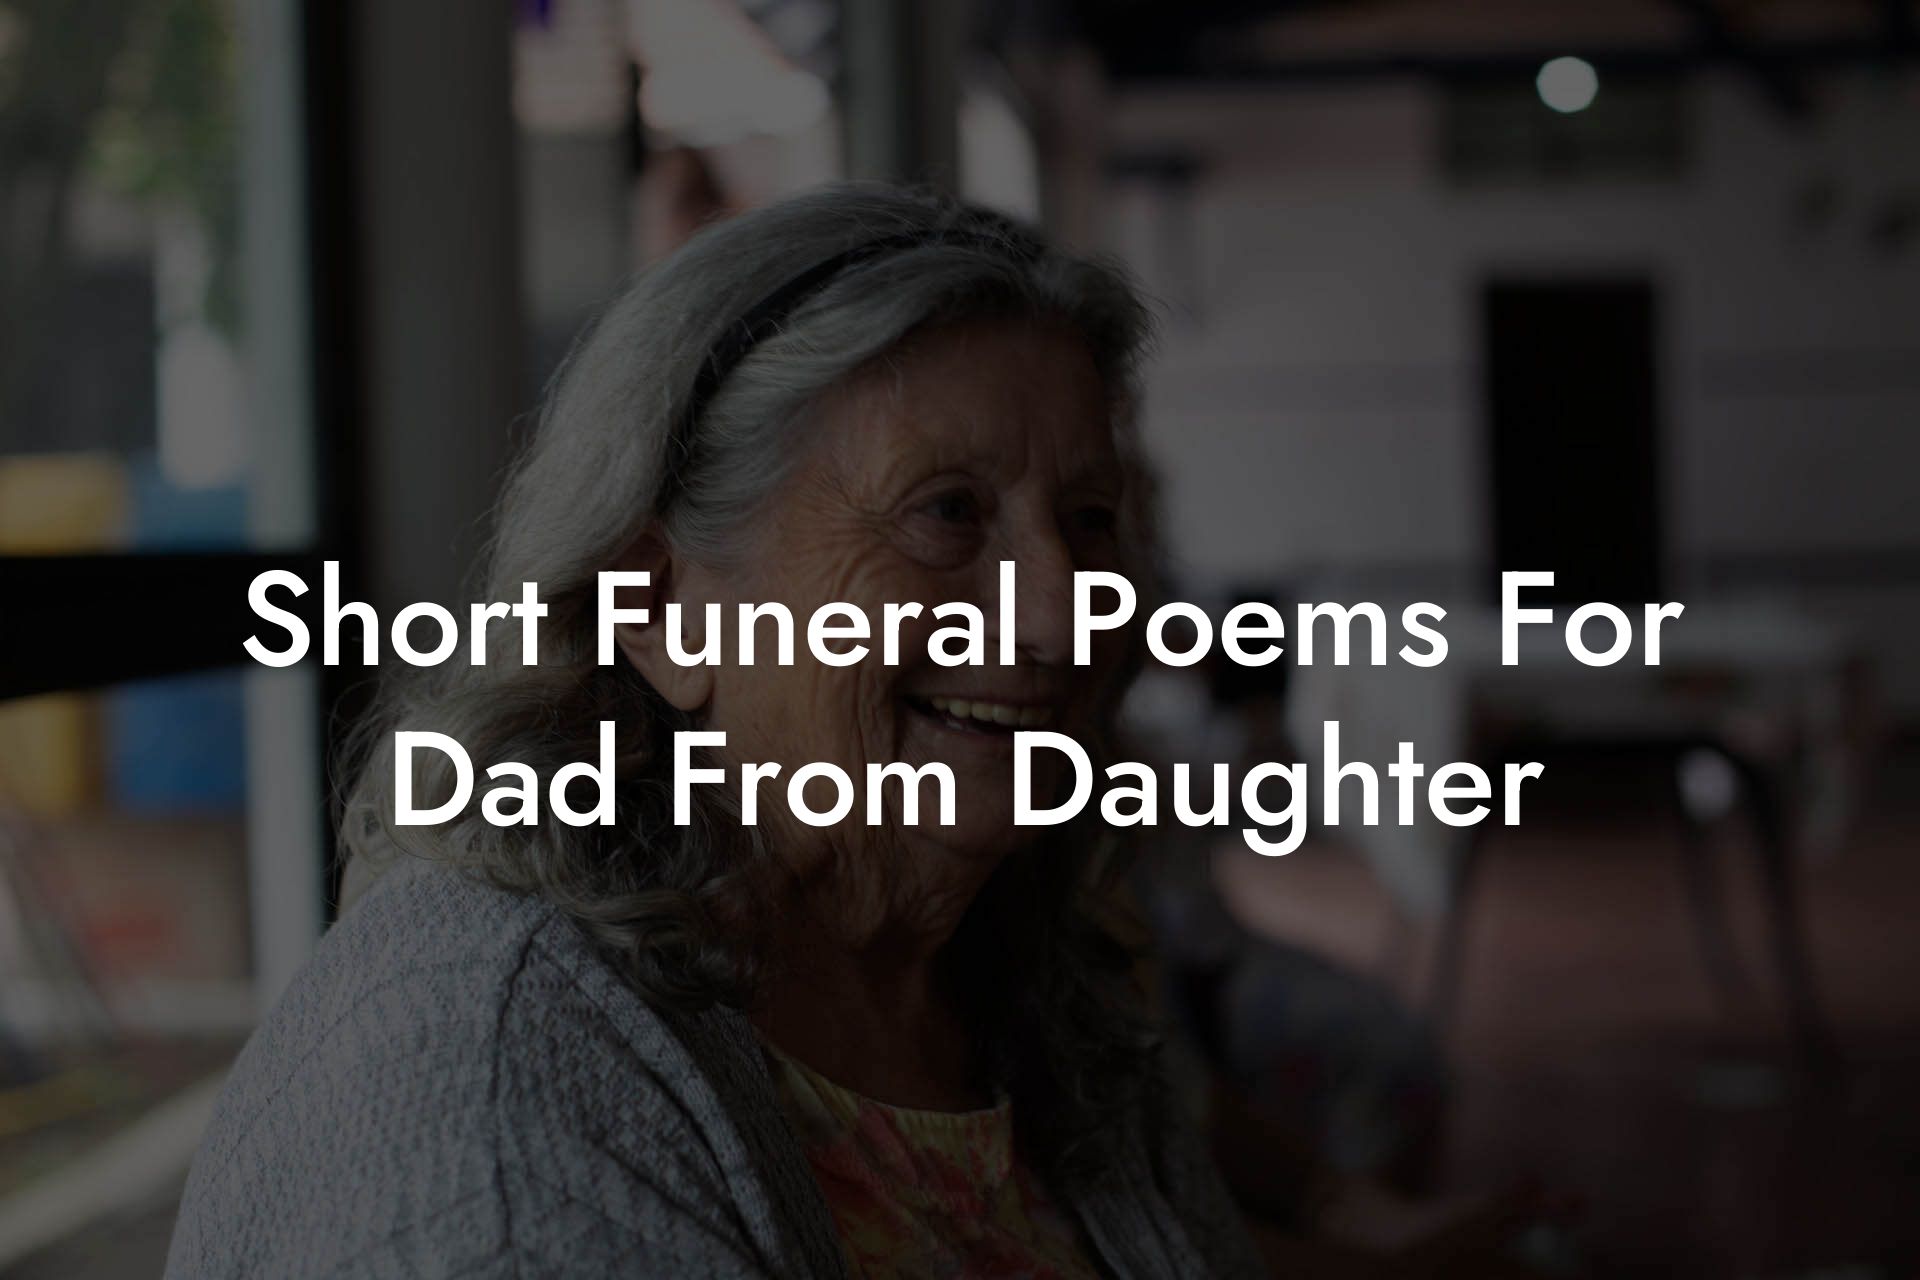 Short Funeral Poems For Dad From Daughter